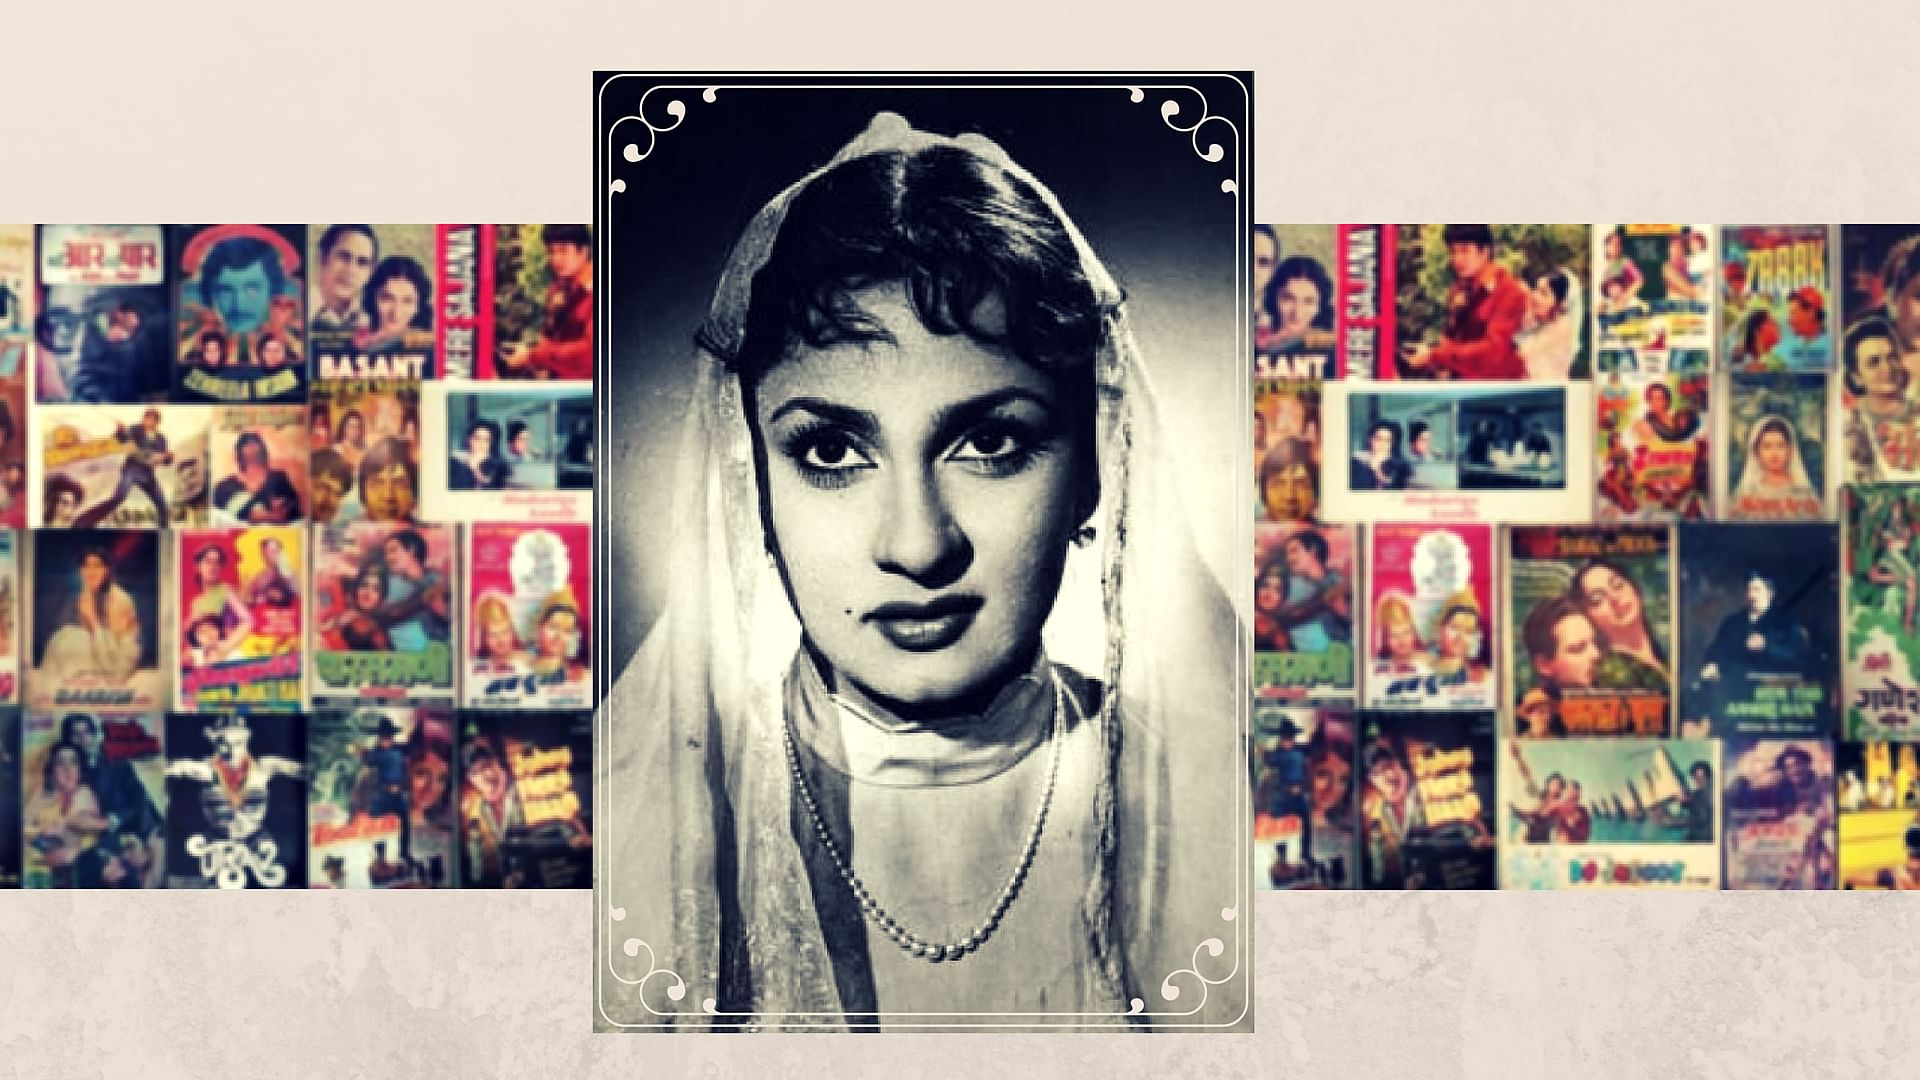 Remembering Nadira on her death anniversary (Photo: <a href="http://hamaraphotos.com/nadira_465_1.html">hamaraphotos.com</a>, altered by The Quint)